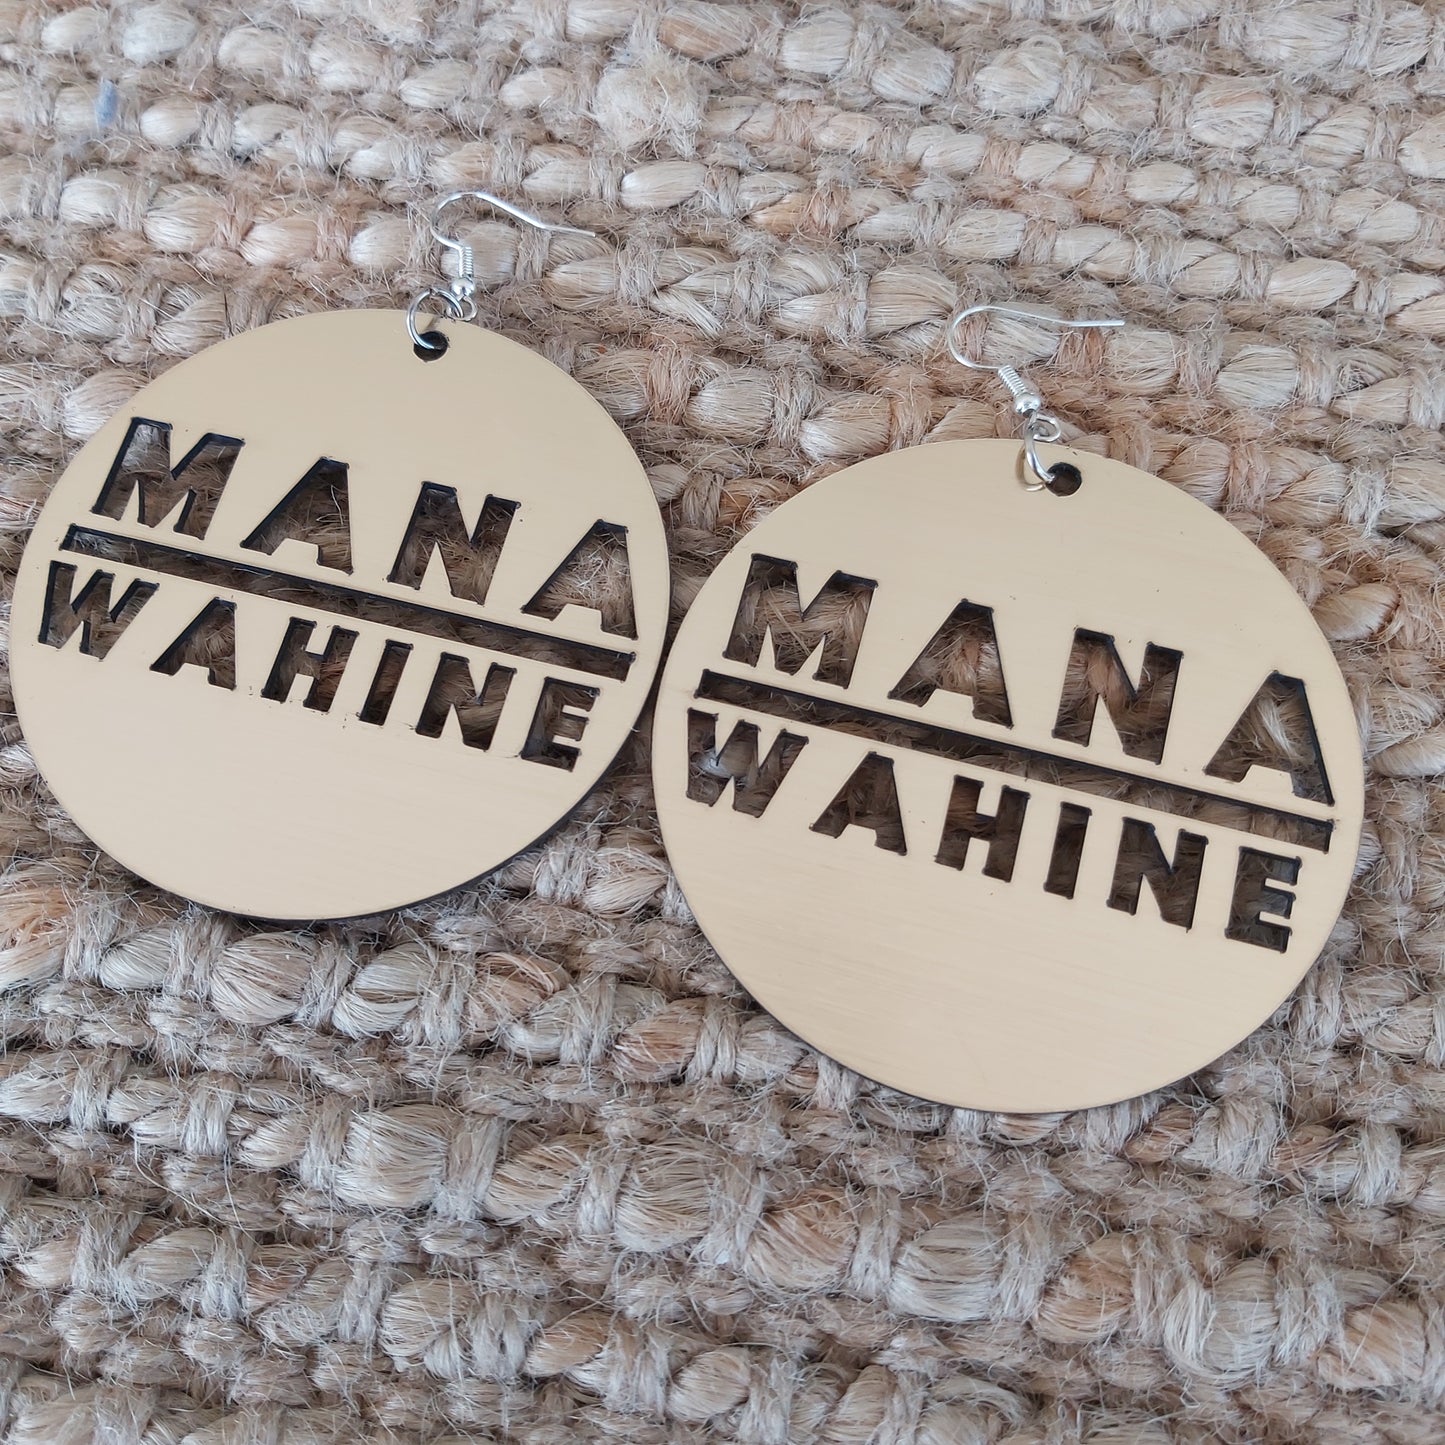 MANAWAHINE Cut-out (Large) Earrings